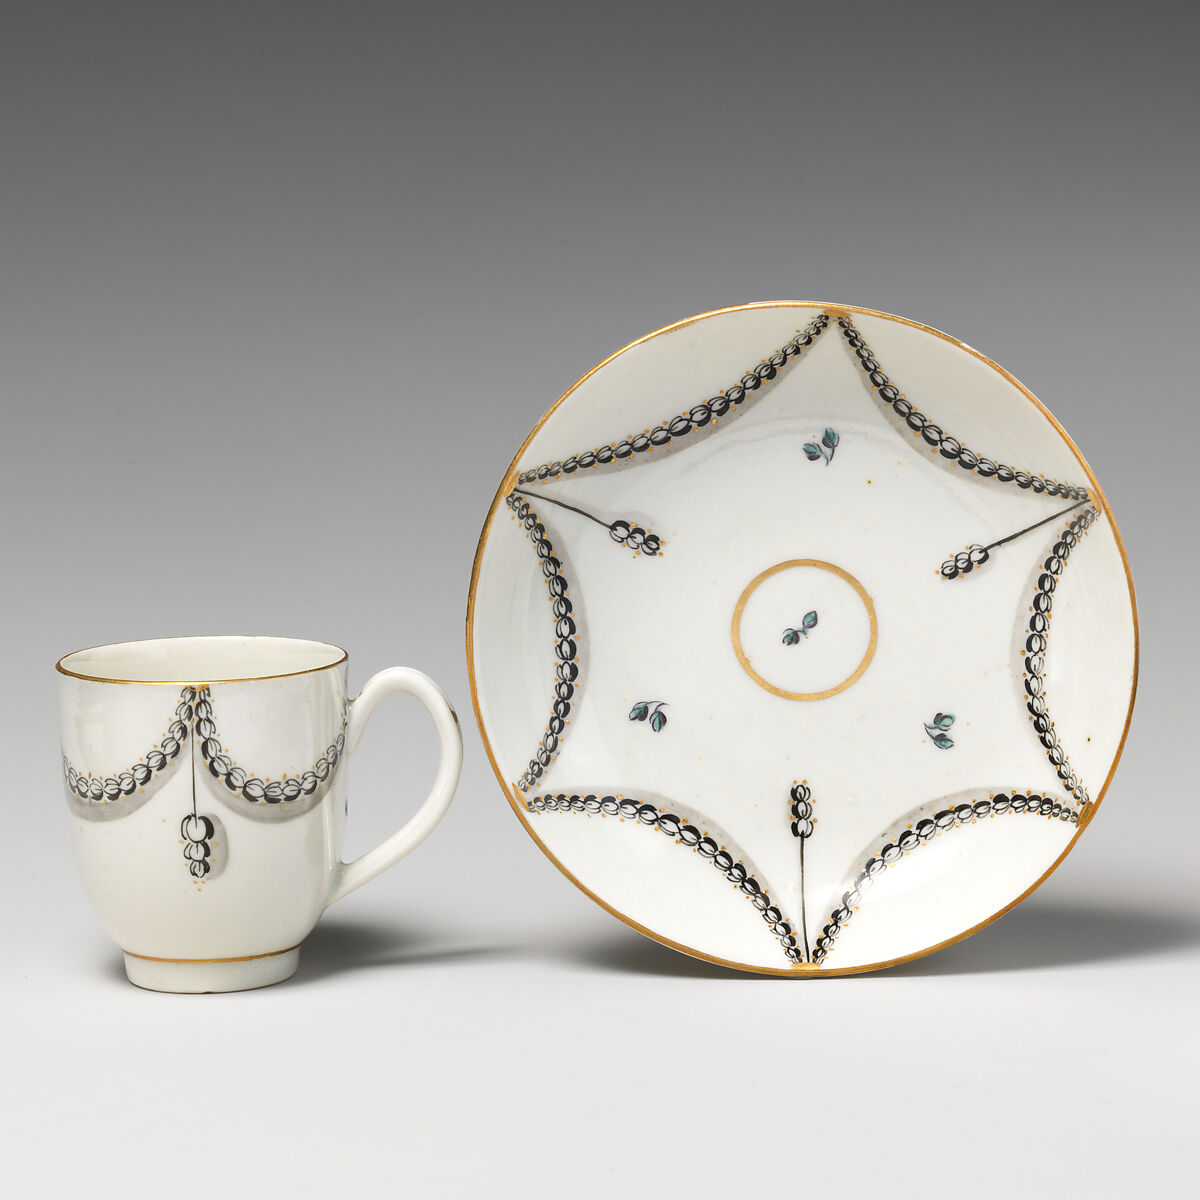 Coffee cup (part of a service), Caughley Factory (British, ca. 1772–1799), Soft-paste porcelain, British, Caughley 